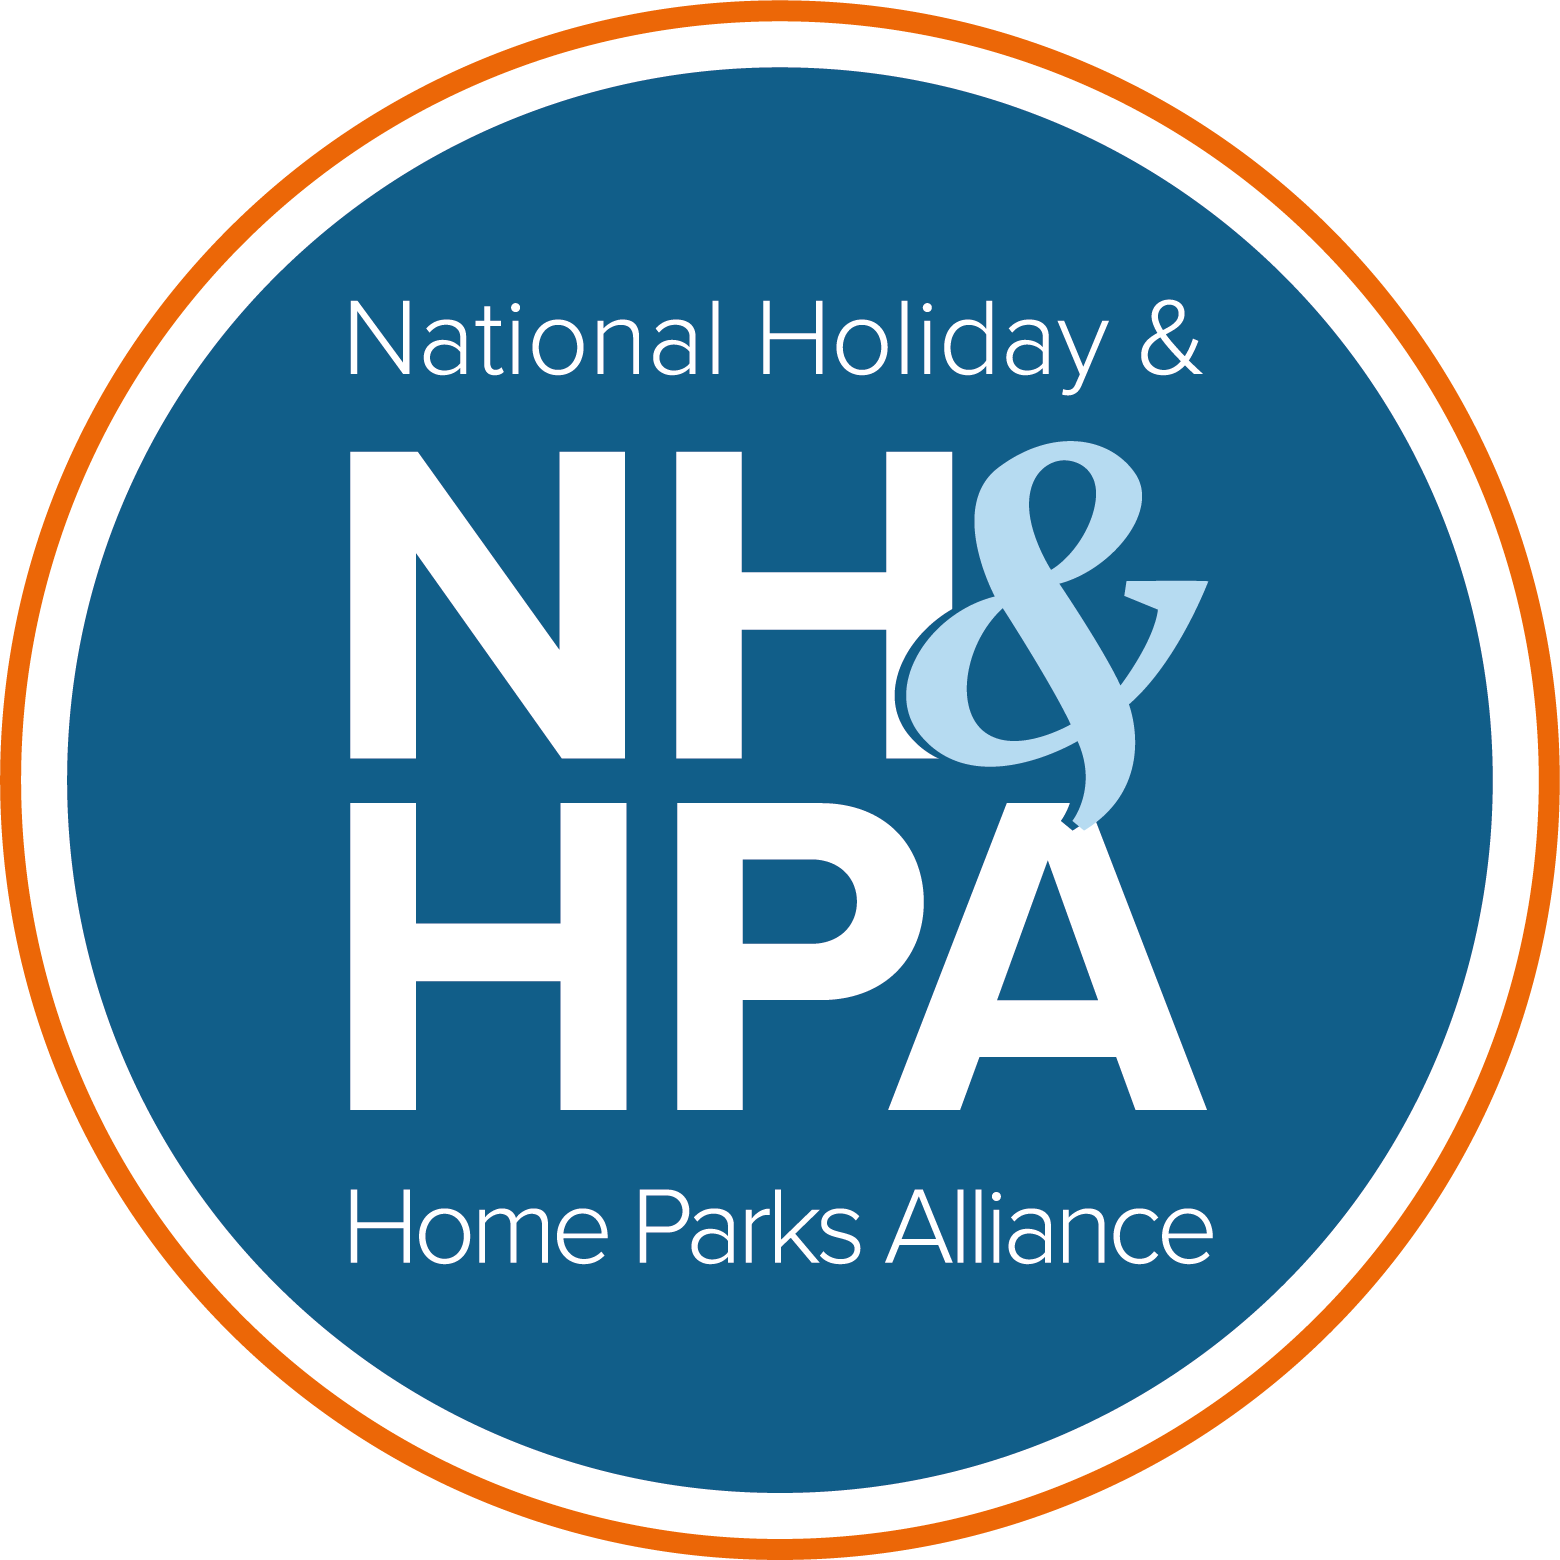 NHHPA National holiday and home park alliance